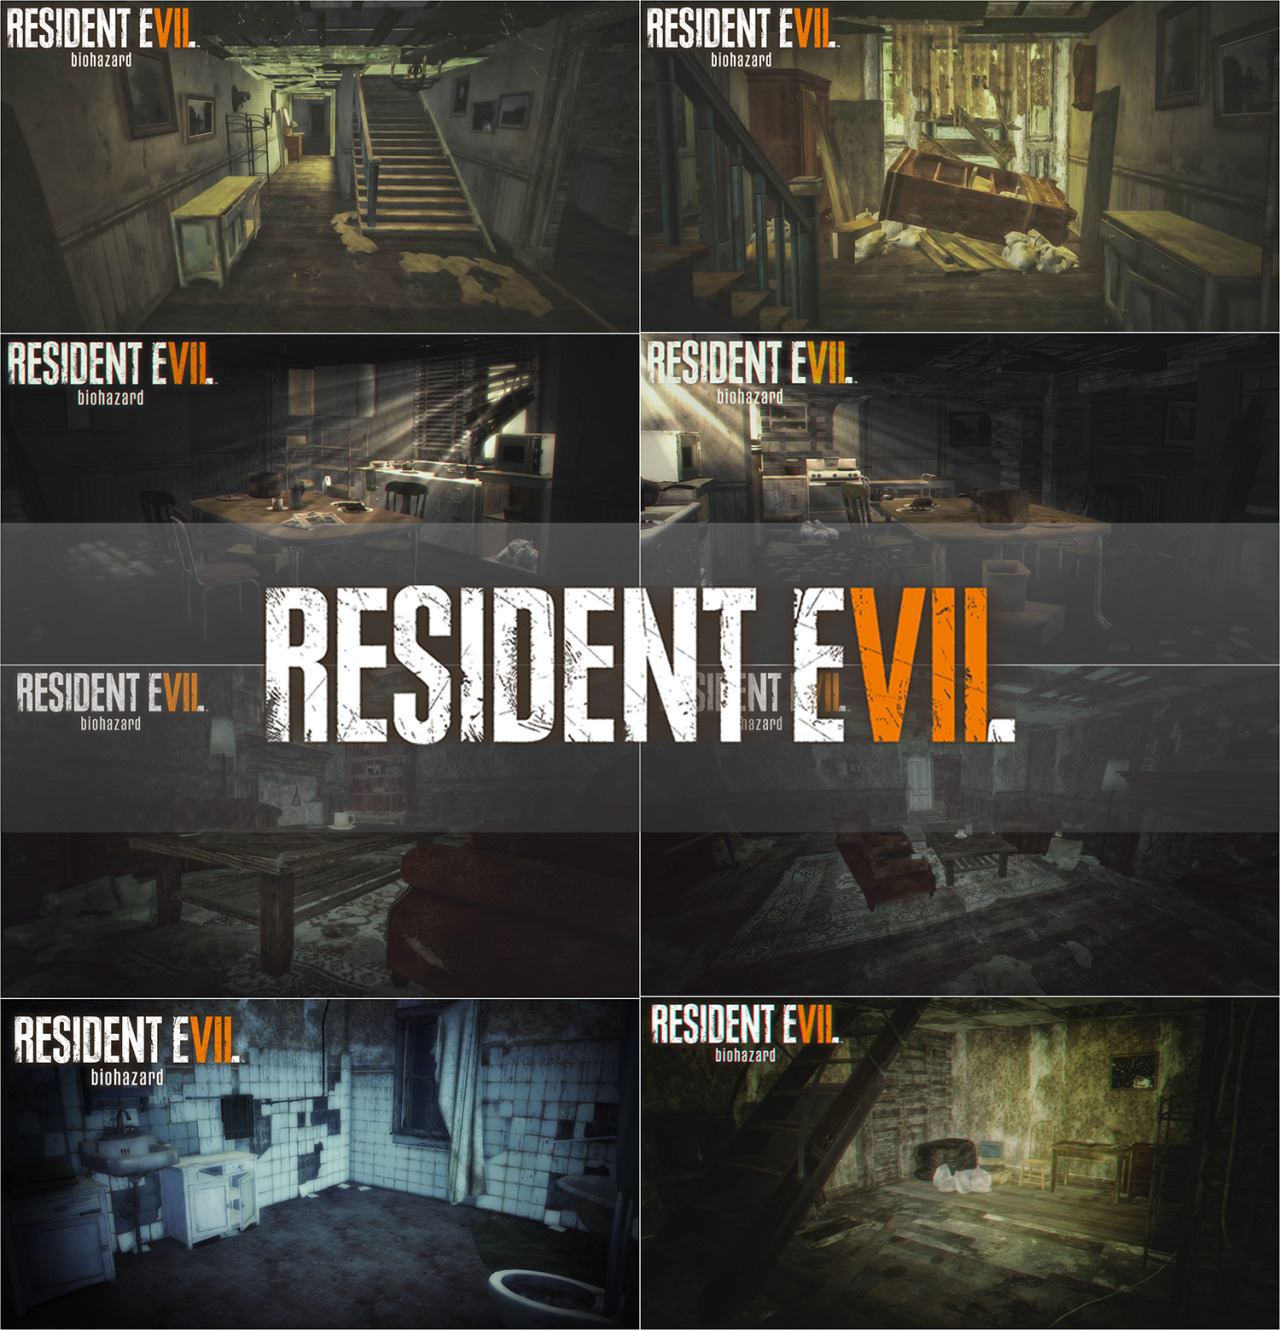 mimoto-sims:
“ Resident Evil 7 Rooms • This set include 6 rooms: kithen, 2 corridors, living room, bathroom, 2nd floor;
Kithen:
Room size - 6x12
Type: Kithen
Price: $2,621
Living room:
Room size - 7x11
Type: Living room
Price: $2,249
Corridor 1:
Room...